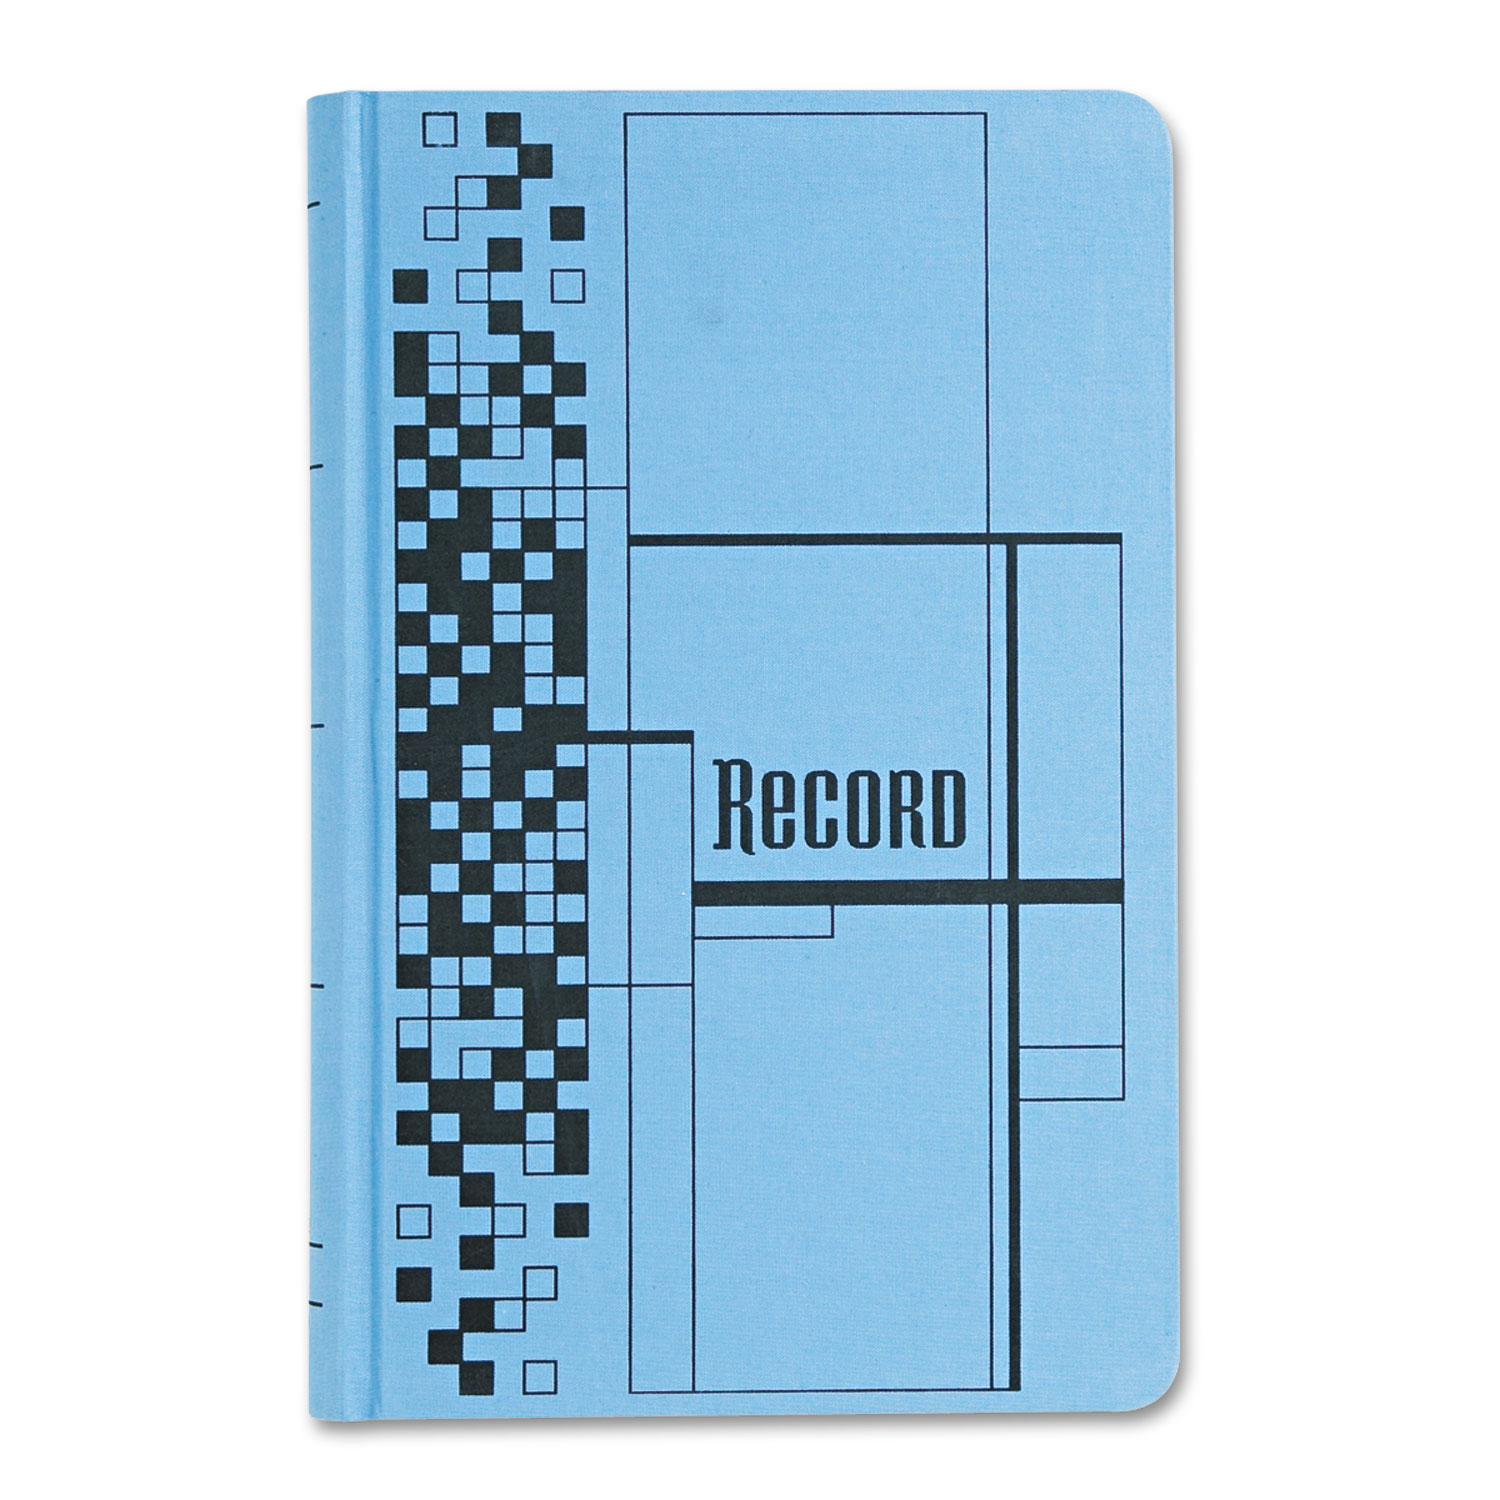  Adams ARB712CR5 Record Ledger Book, Blue Cloth Cover, 500 7 1/4 x 11 3/4 Pages (ABFARB712CR5) 